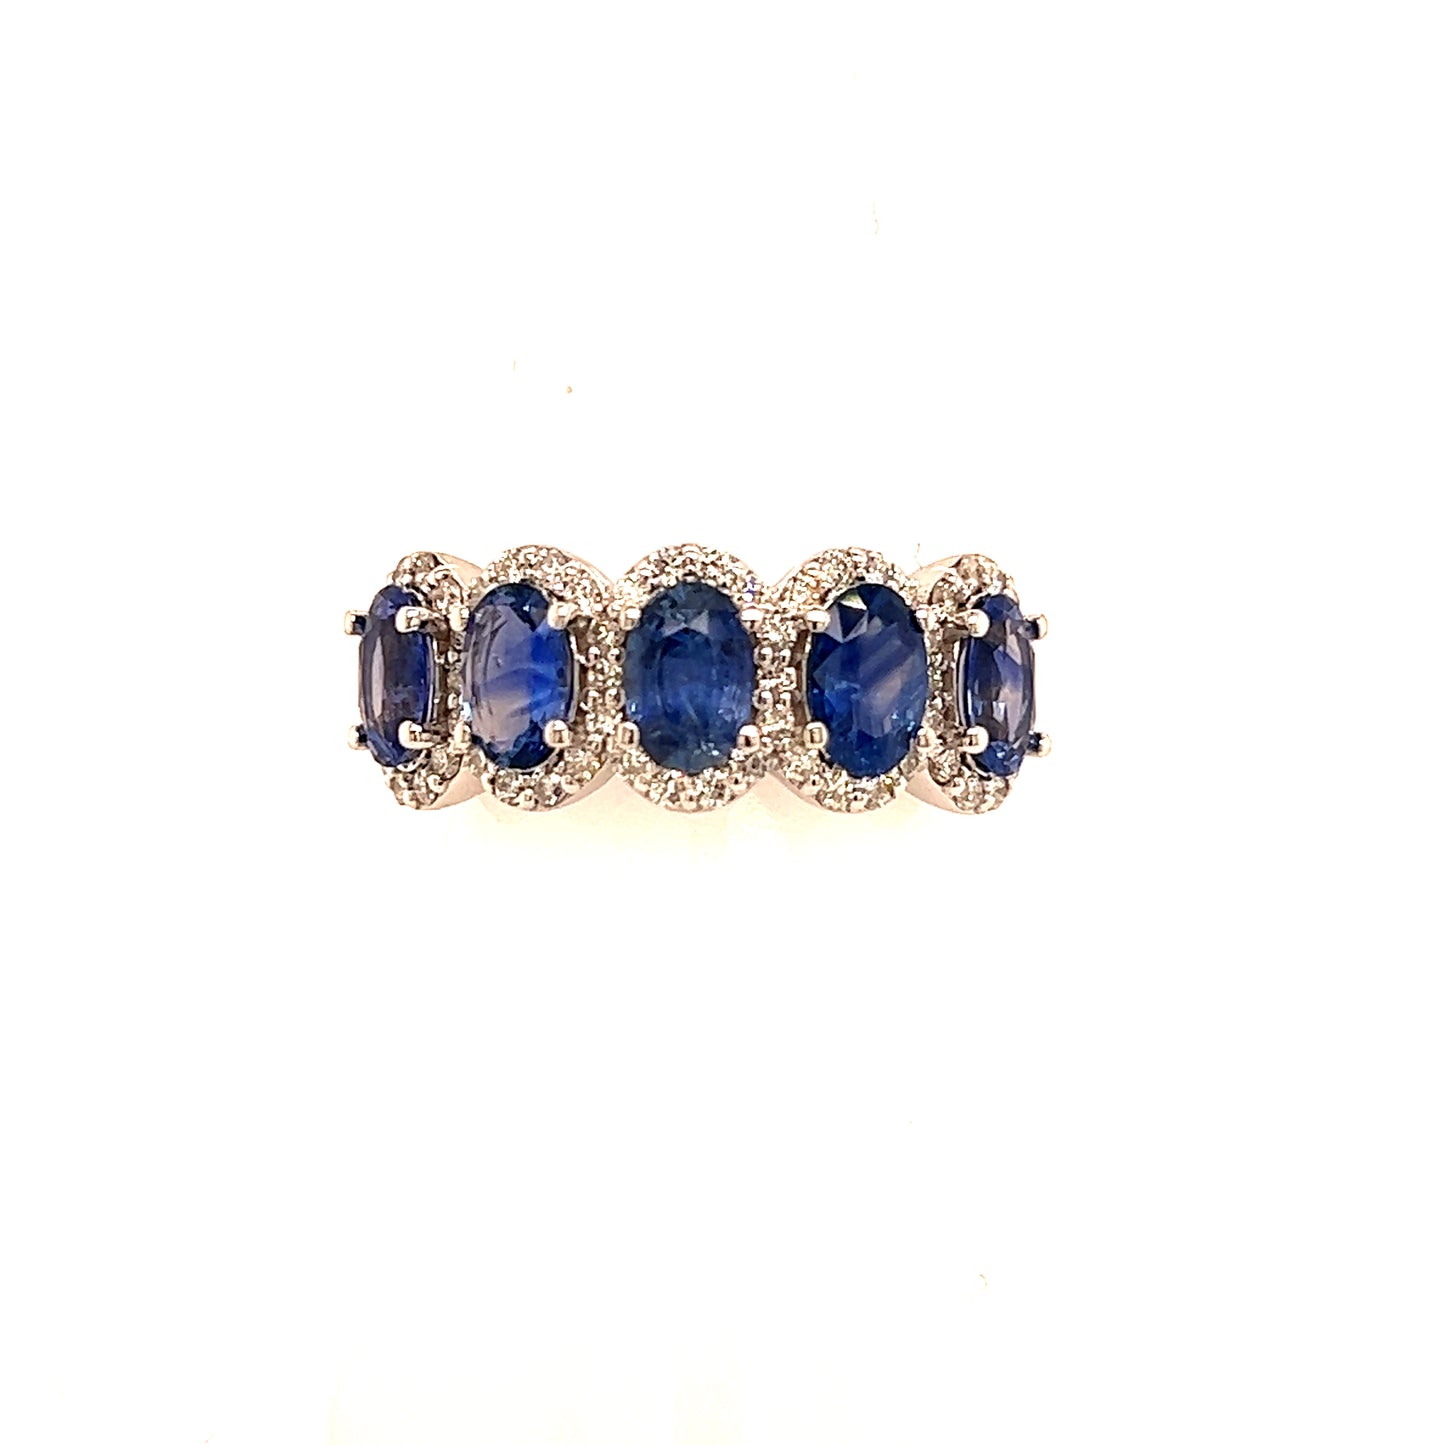 Natural Sapphire Diamond Ring 7 14k W Gold 3.07 TCW Certified $5,975 218112